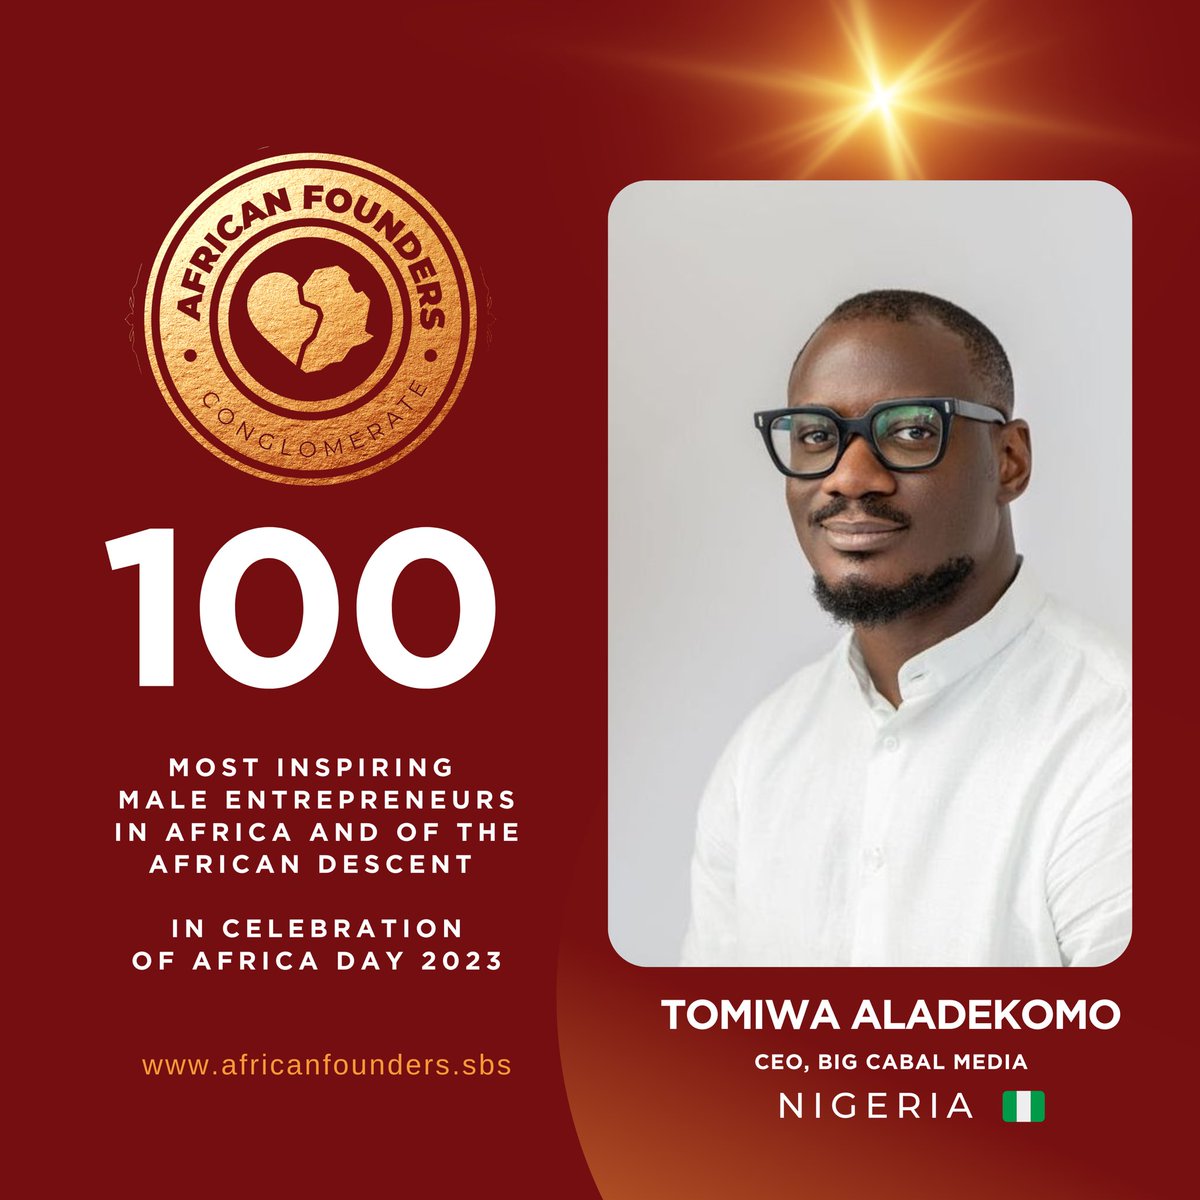 #AFCFeatures | In celebration of AFRICA DAY , we honor Tomiwa of @TechCabal for his resilience, achievements and great entrepreneurial spirit.

African Founders Feature.
#100mostinspiringmaleentrepreneurs
.
AFRICAN FOUNDERS CONGLOMERATE | Promoting Entrepreneurship & Lifestyle